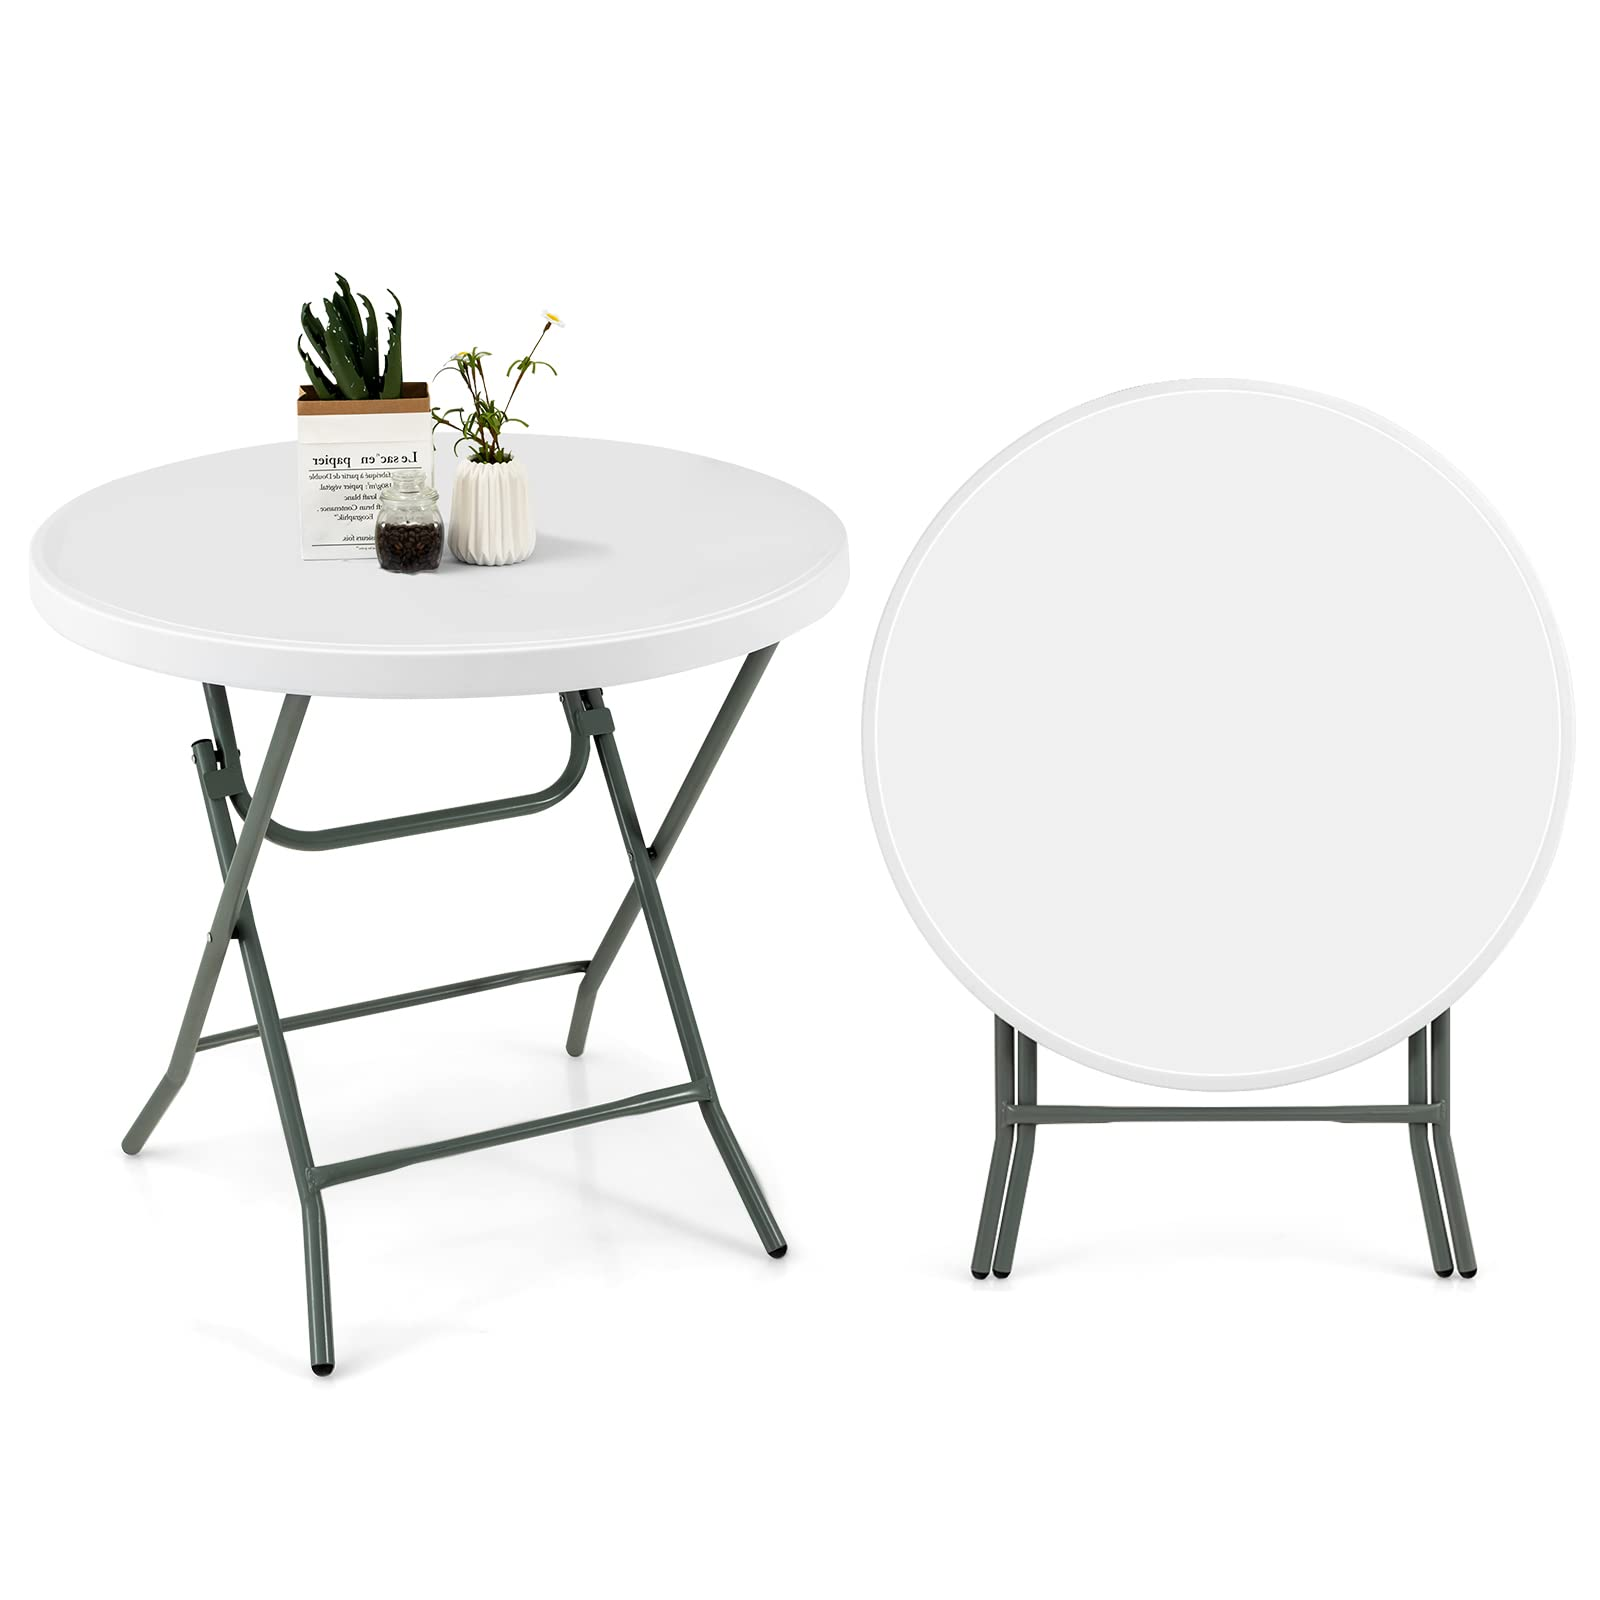 Giantex 32 Inches Round Folding Table, Portable Plastic Card Table with Thickened HDPE Tabletop and Sturdy Metal Frame, White